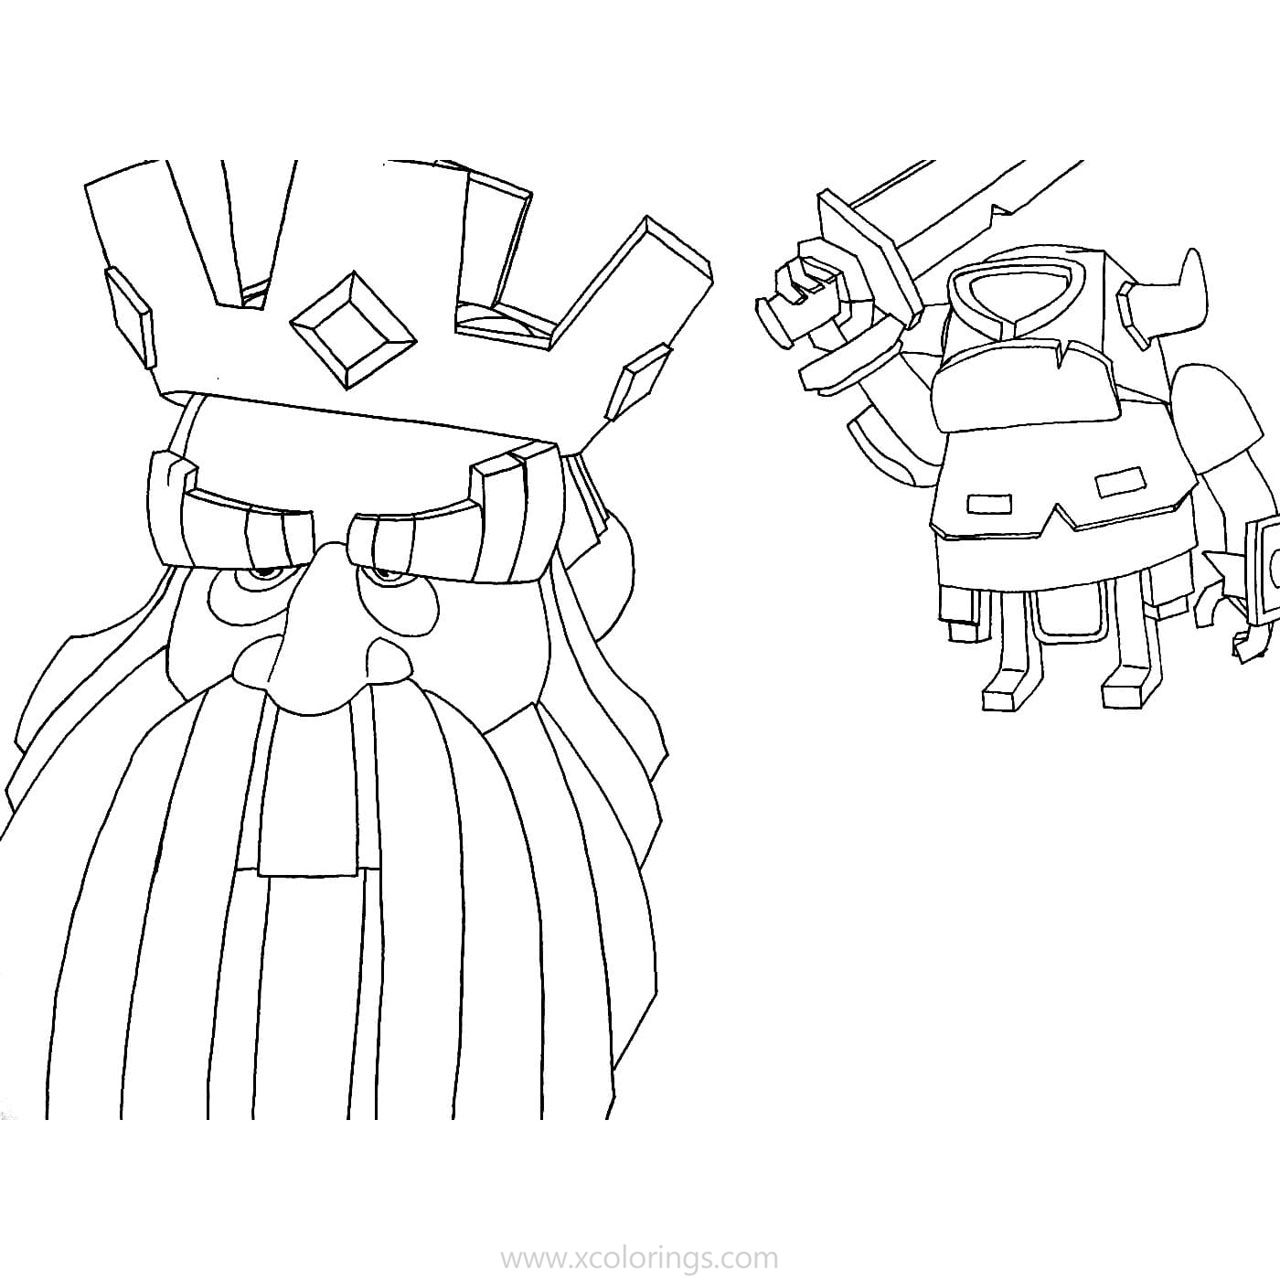 Free Clash Royale Coloring Pages Royal Ghost and Mini Pekka printable